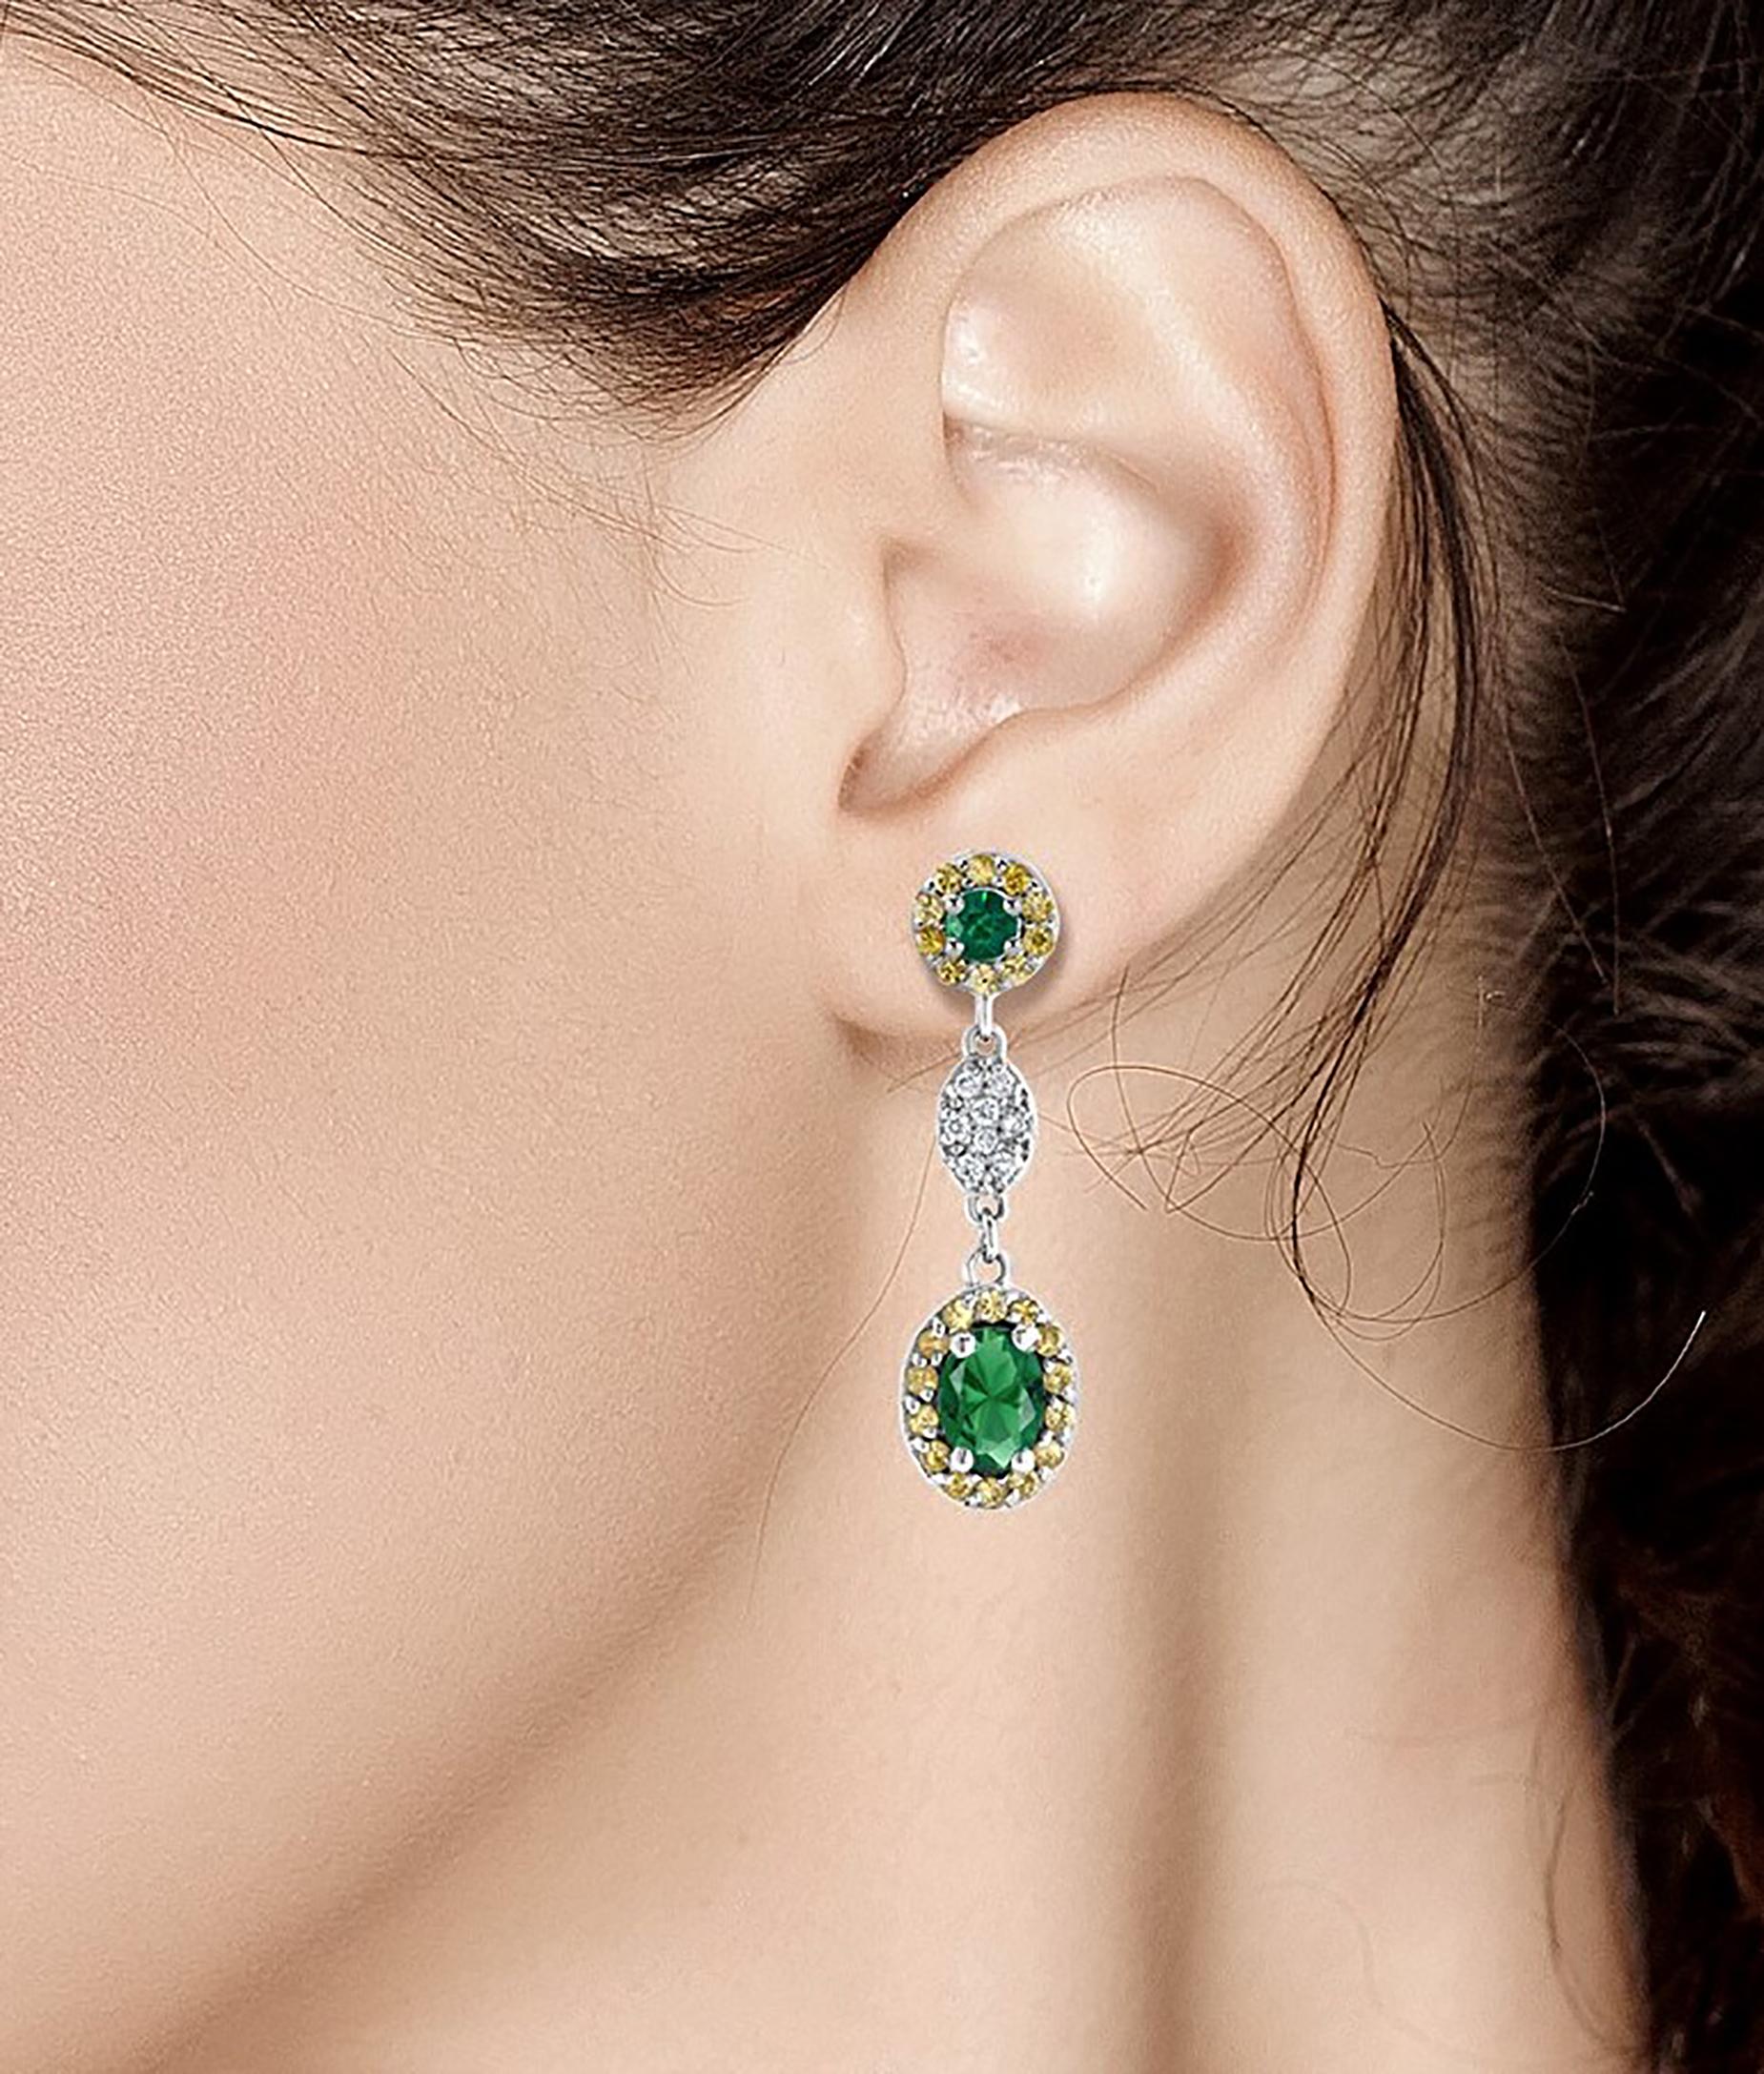 Fourteen karat white gold drop earrings with oval emerald, yellow sapphire and diamonds
Oval emerald weighing 1.10 carat 
Diamond weighing 0.20 carat 
Yellow Sapphire weighing 0.35 carat 
Earrings measuring one inch long 
One of a kind earrings 
New